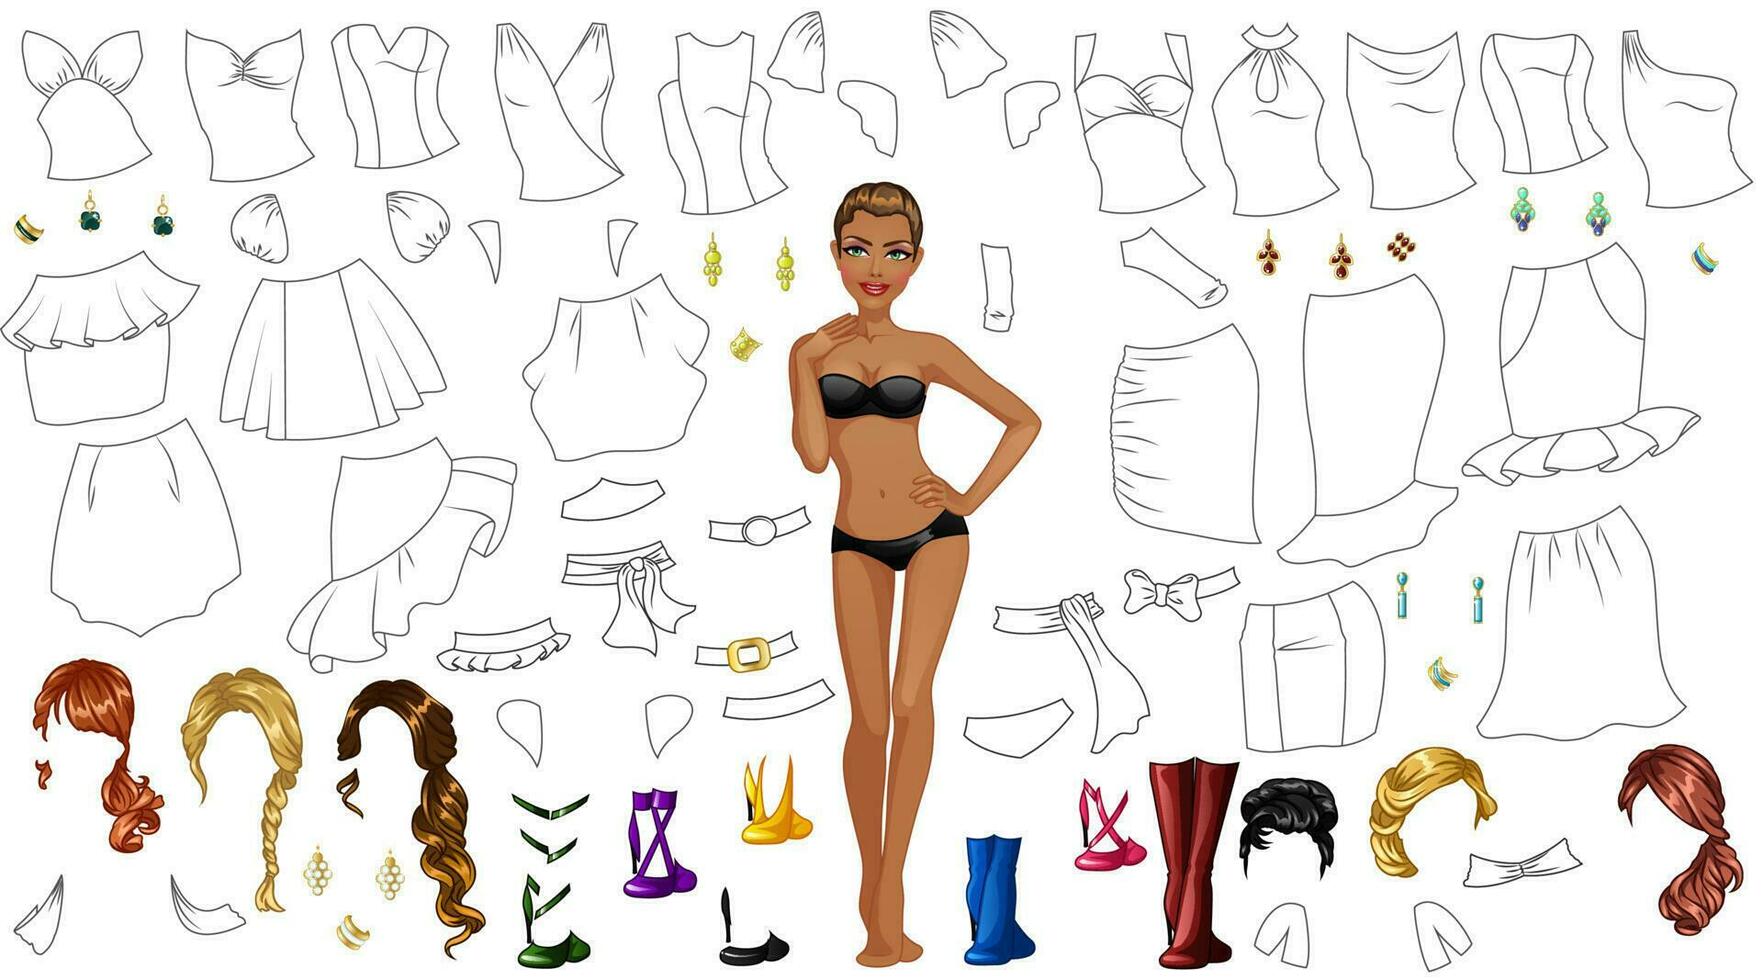 Cocktail Dress Design Coloring Page Paper Doll with Clothes, Hairstyles and Accessories. Vector Illustration